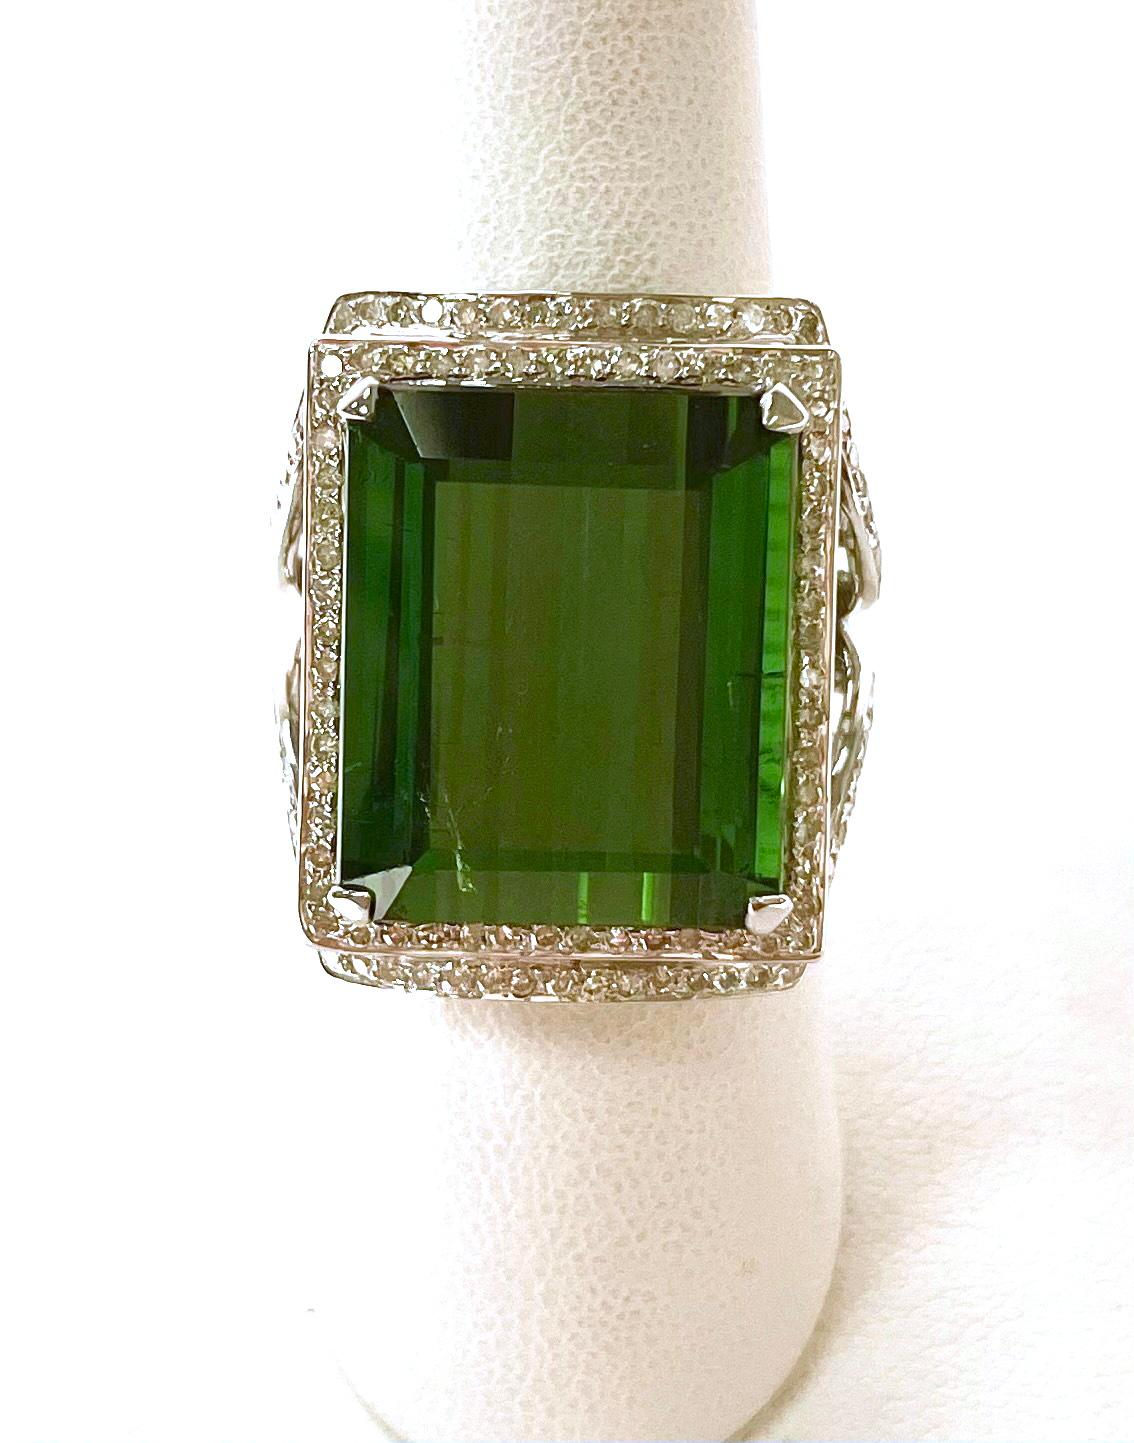 Green Tourmaline 25.2cts Emerald Cut with Pave Diamonds Ring For Sale 1